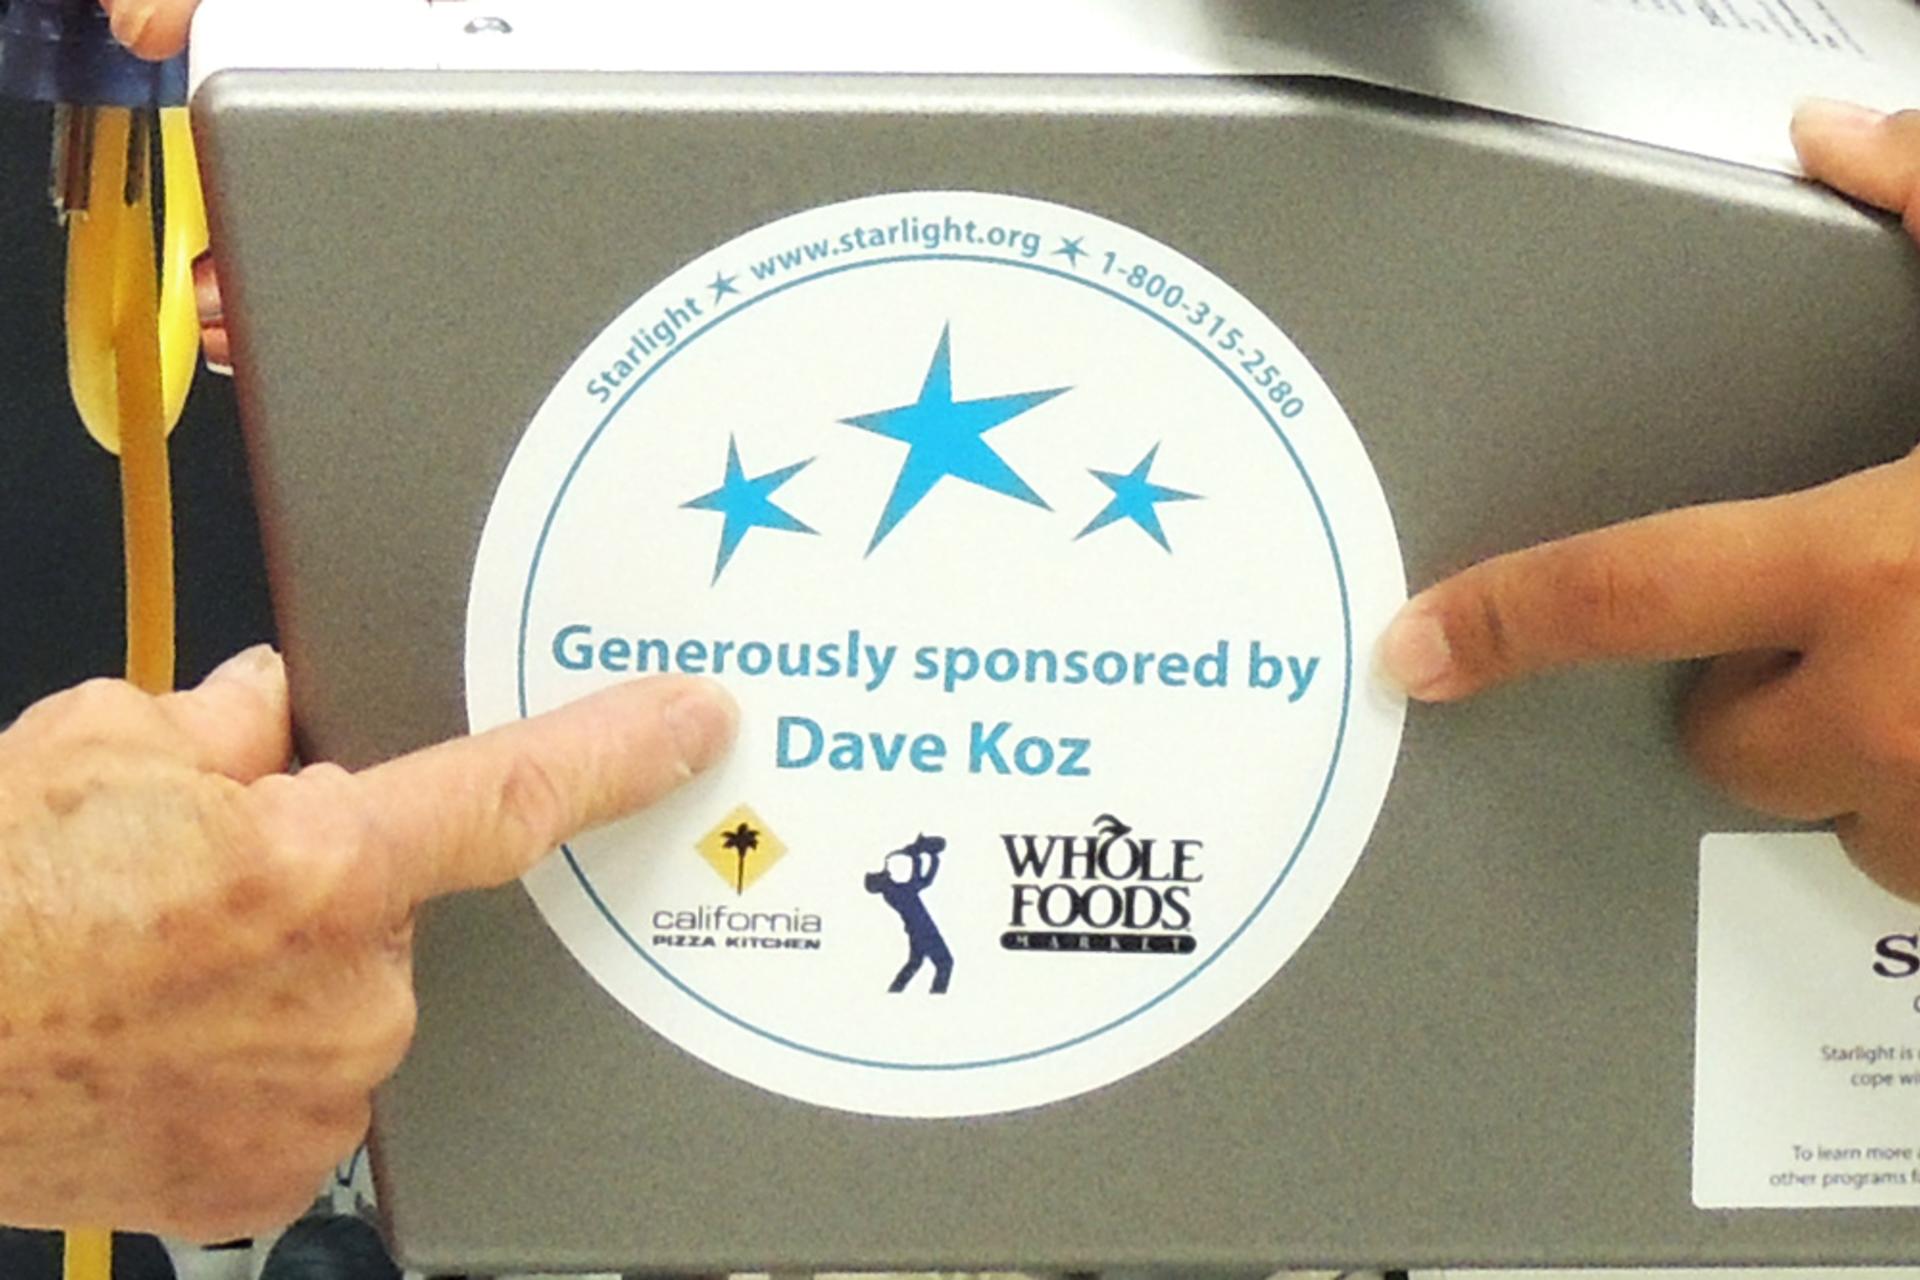 A Wii gaming station with a sticker "Generously sponsored by Dave Koz"